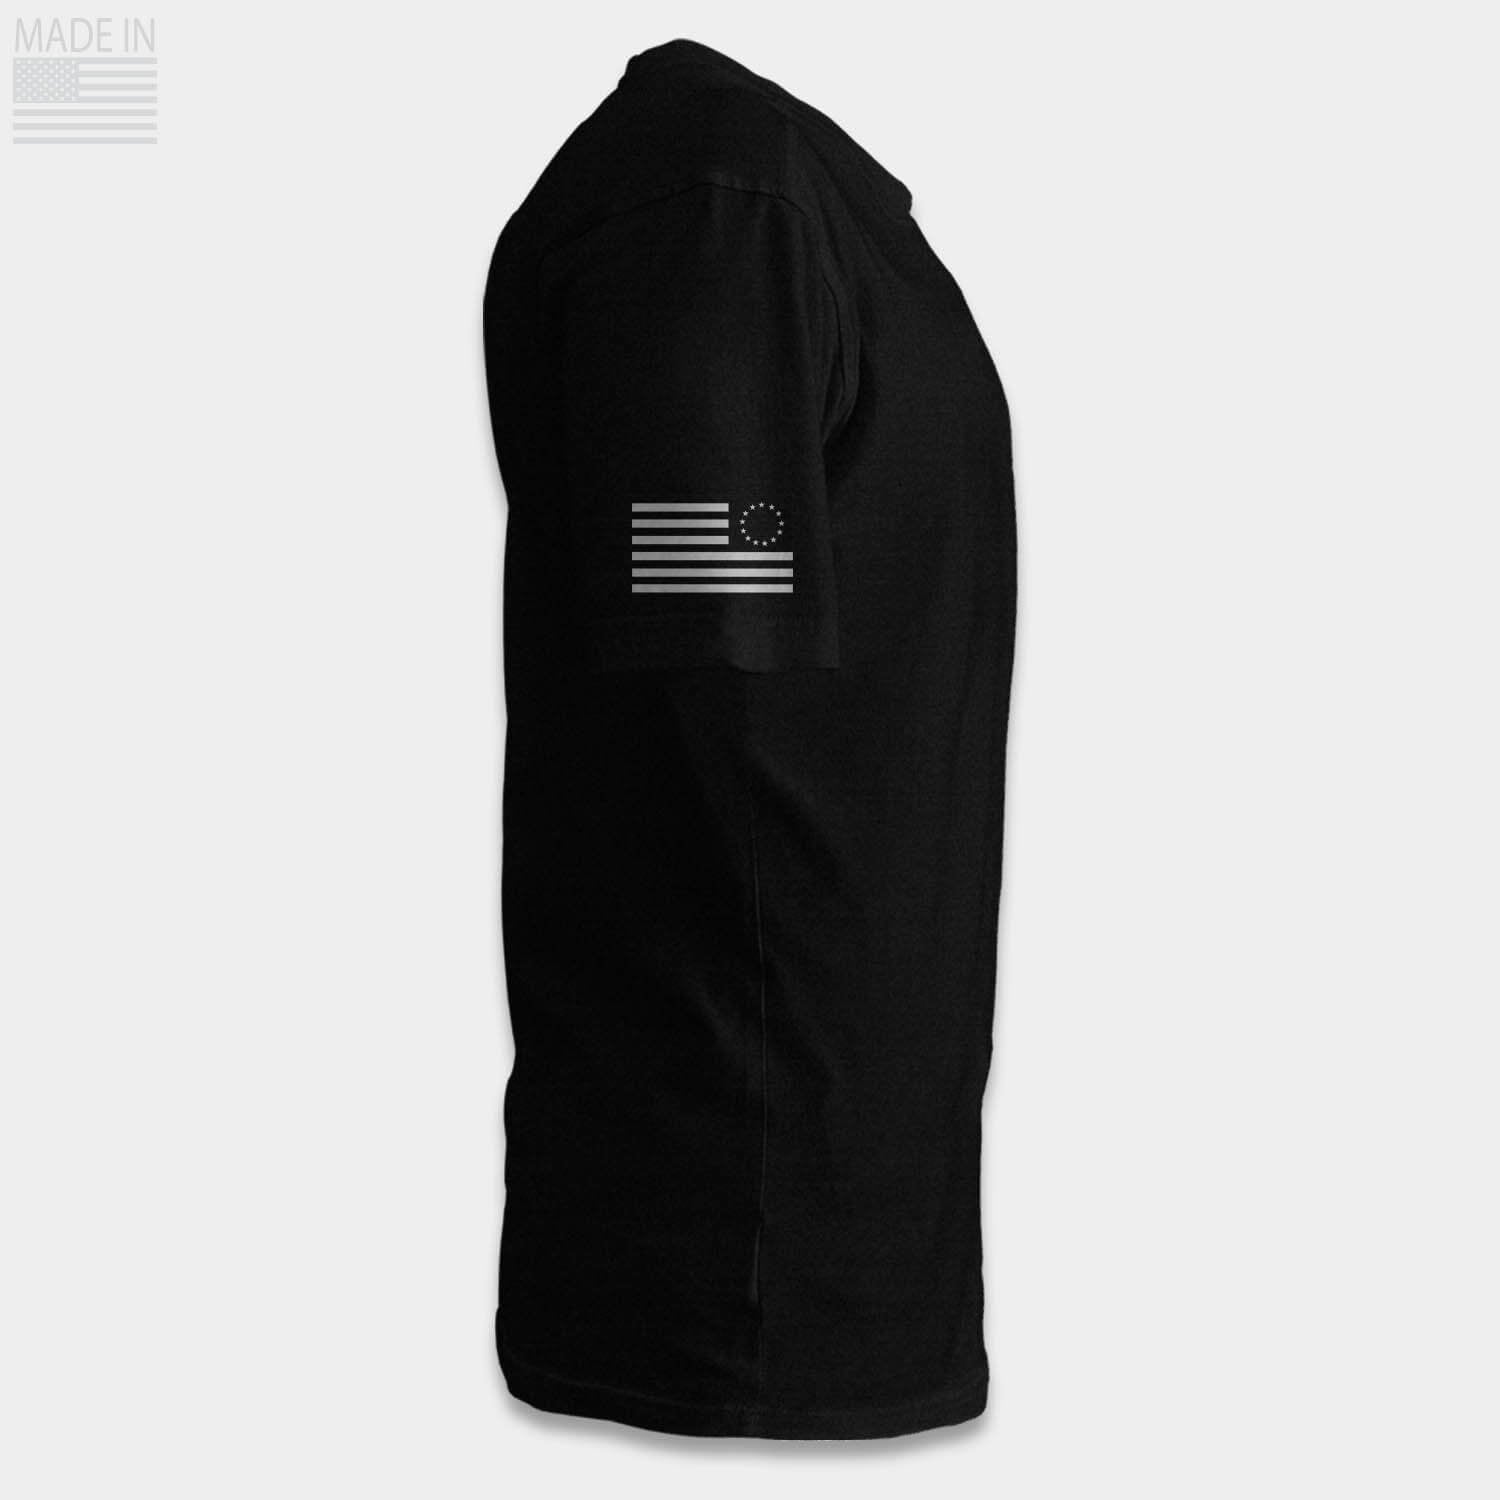 Betsy Ross Flag screen printed on right sleeve